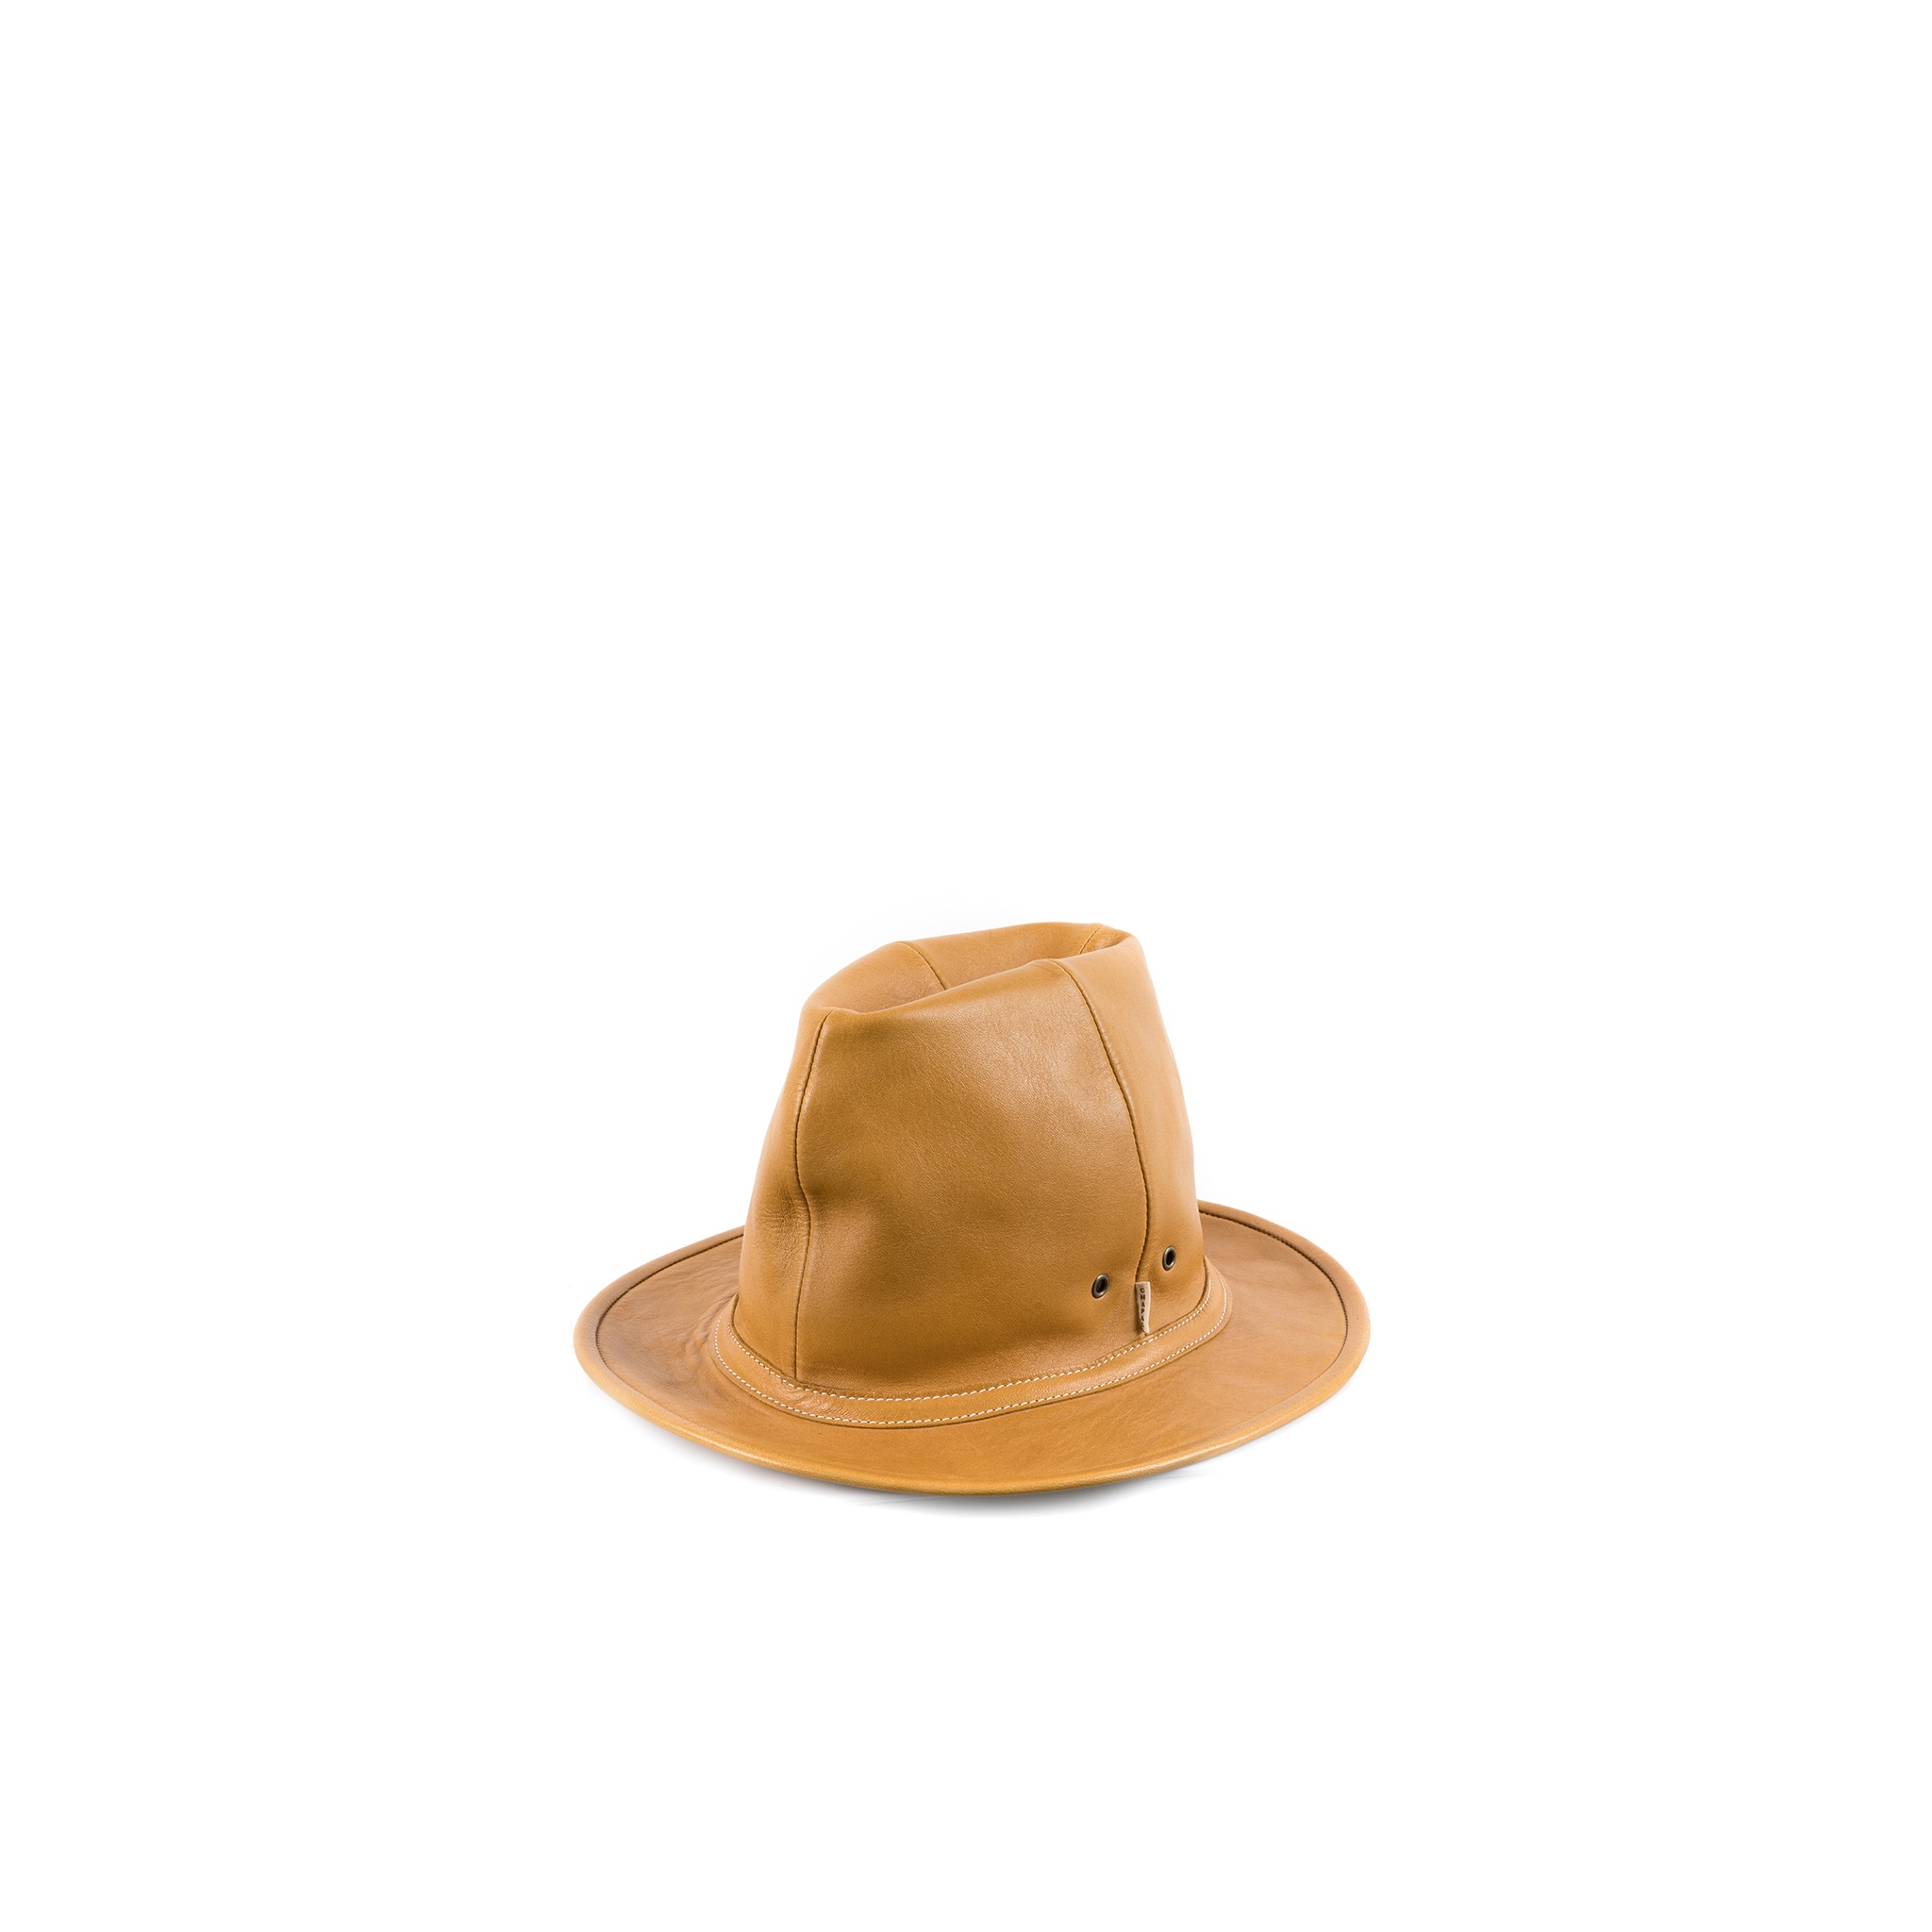 Leather Hat - Glossy leather - Tan color